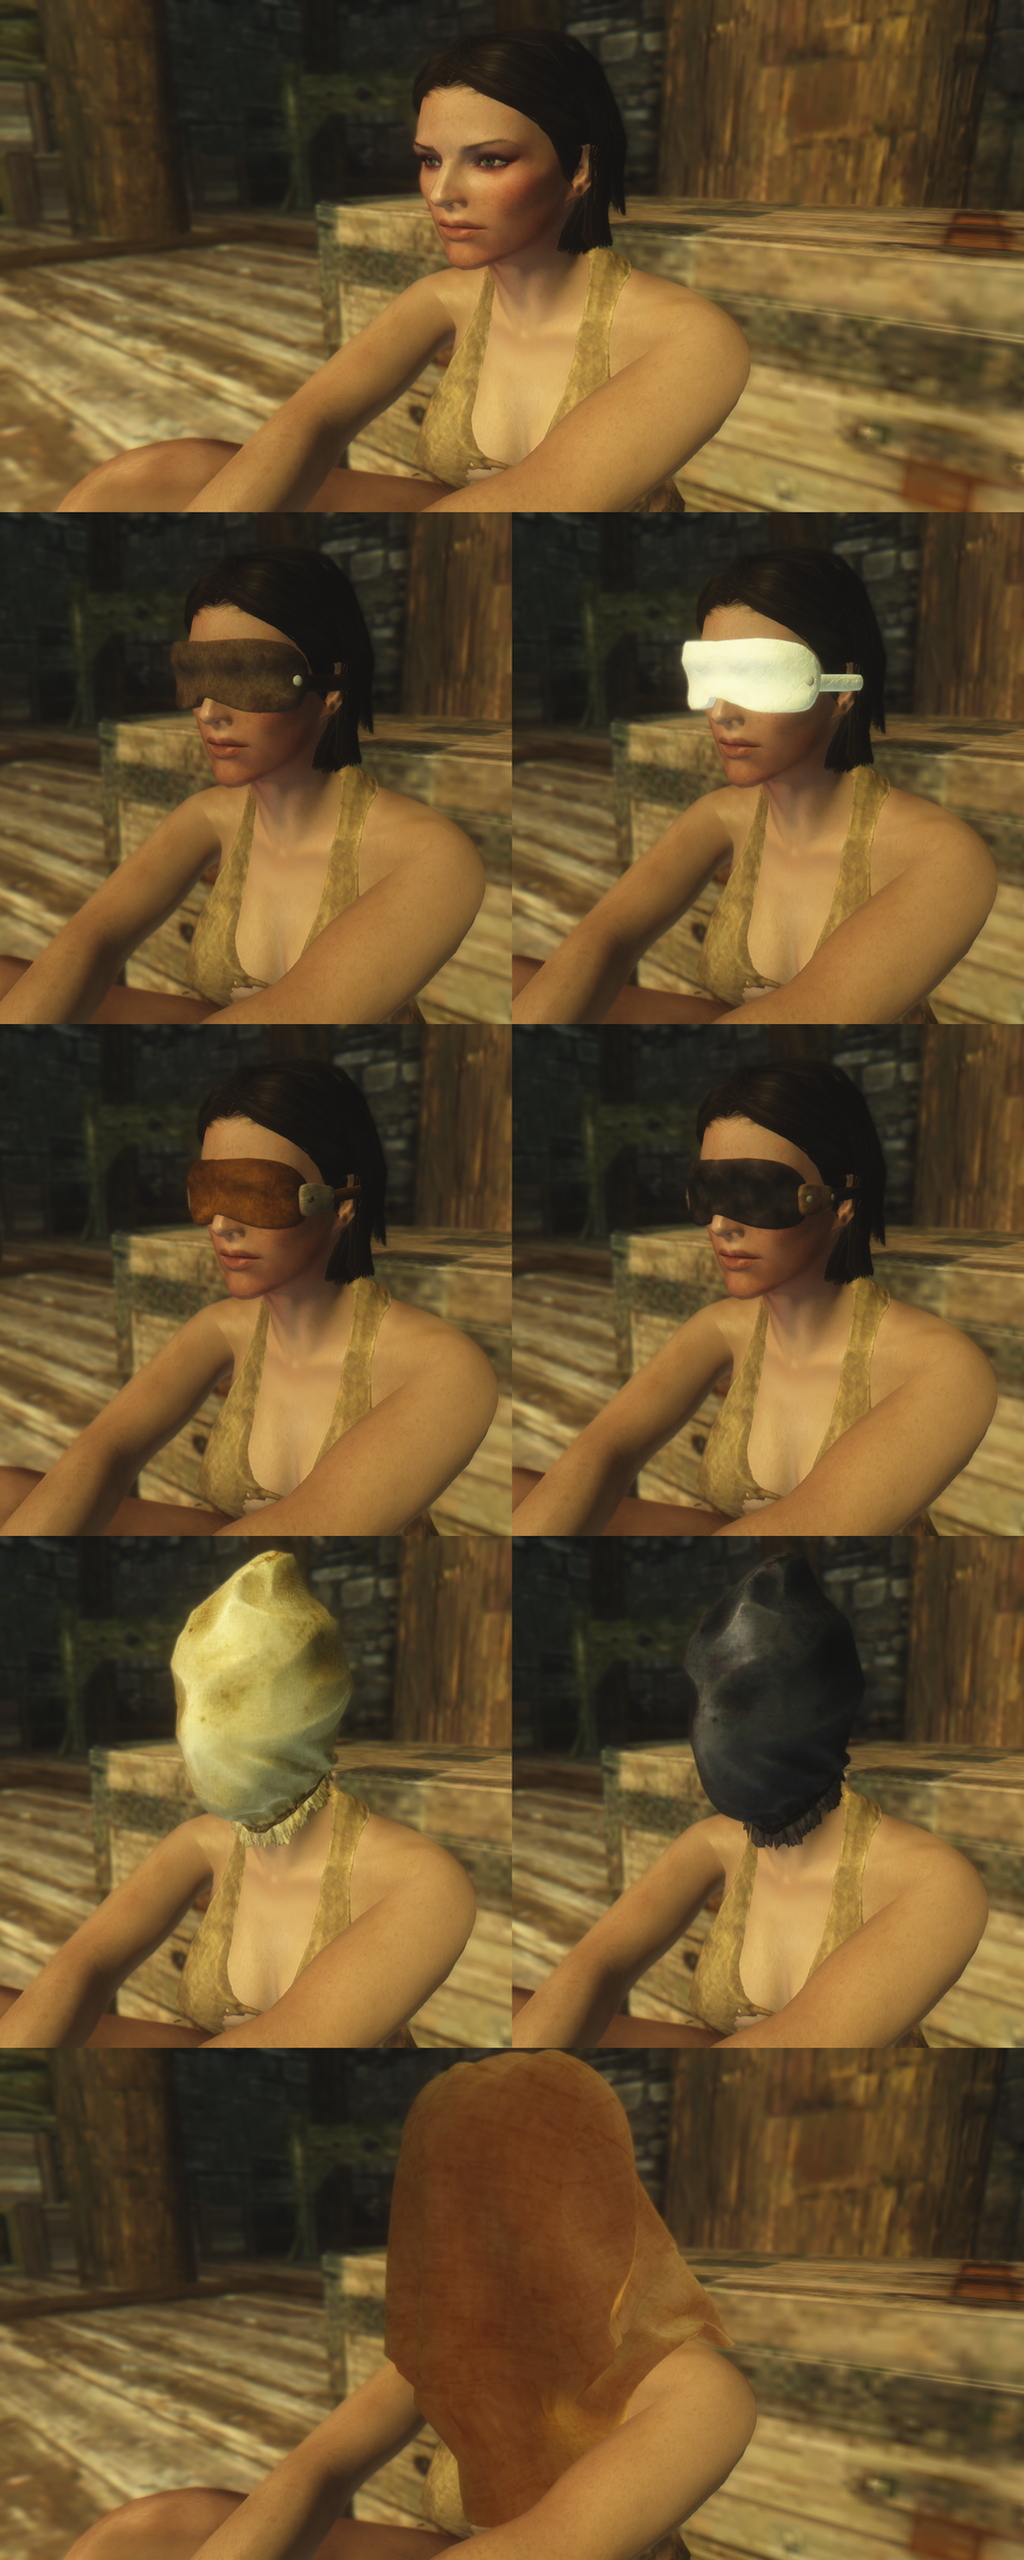 blindfolds_etc_pics_for_zap_by_mastercchris-d7x0rlt.png